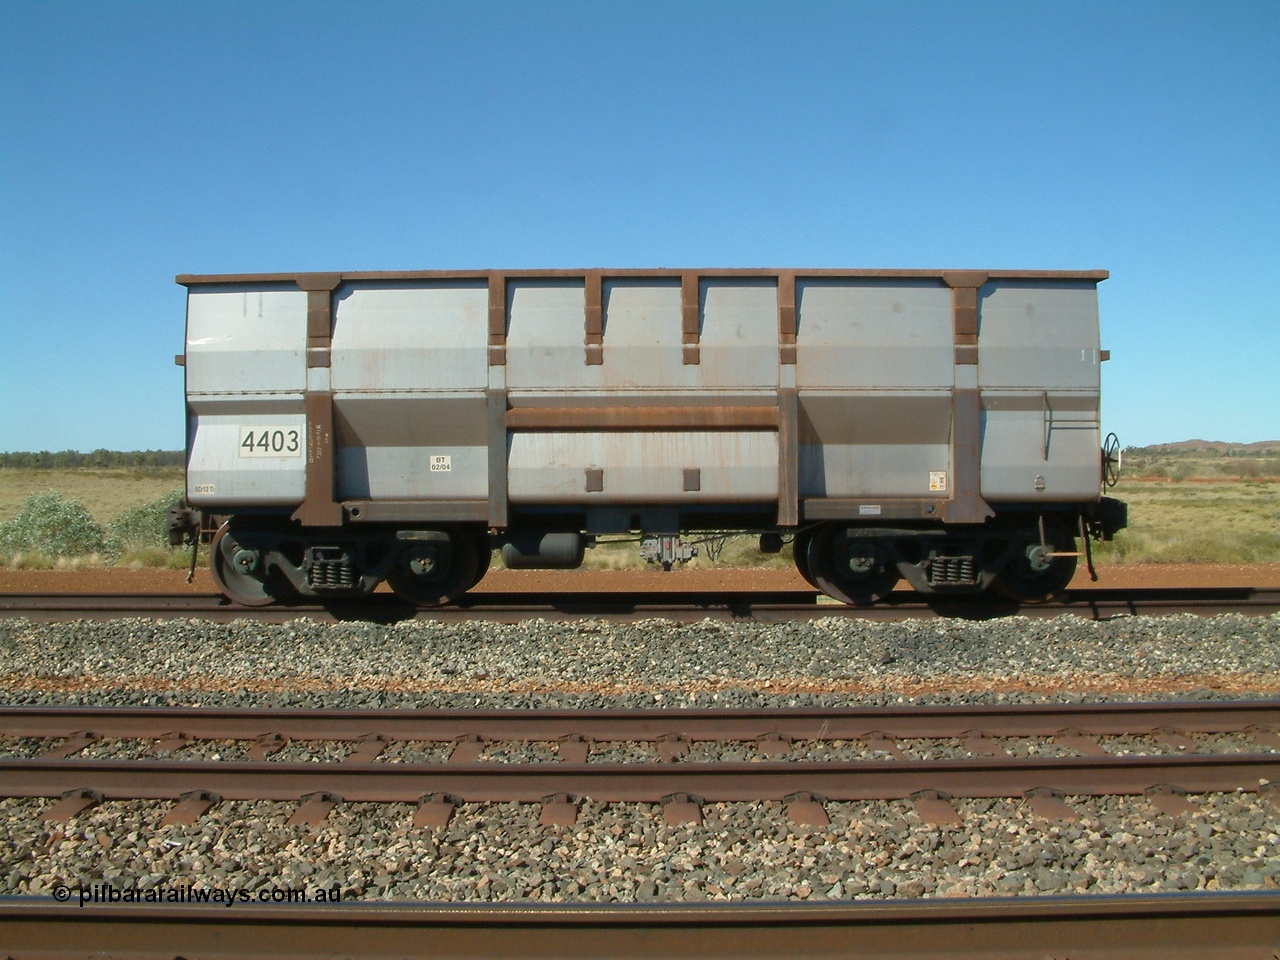 040801 144228
Walla Siding, Goninan built, Lynx Engineering designed ore waggon 4403 made from 5Cr12Ti stainless steel these waggons are known as Golynx waggons, asset number 203510 with serial 950124-004 and build date 02/2004. 1st August 2004.
Keywords: 4403;Goninan-WA;Golynx;BHP-ore-waggon;